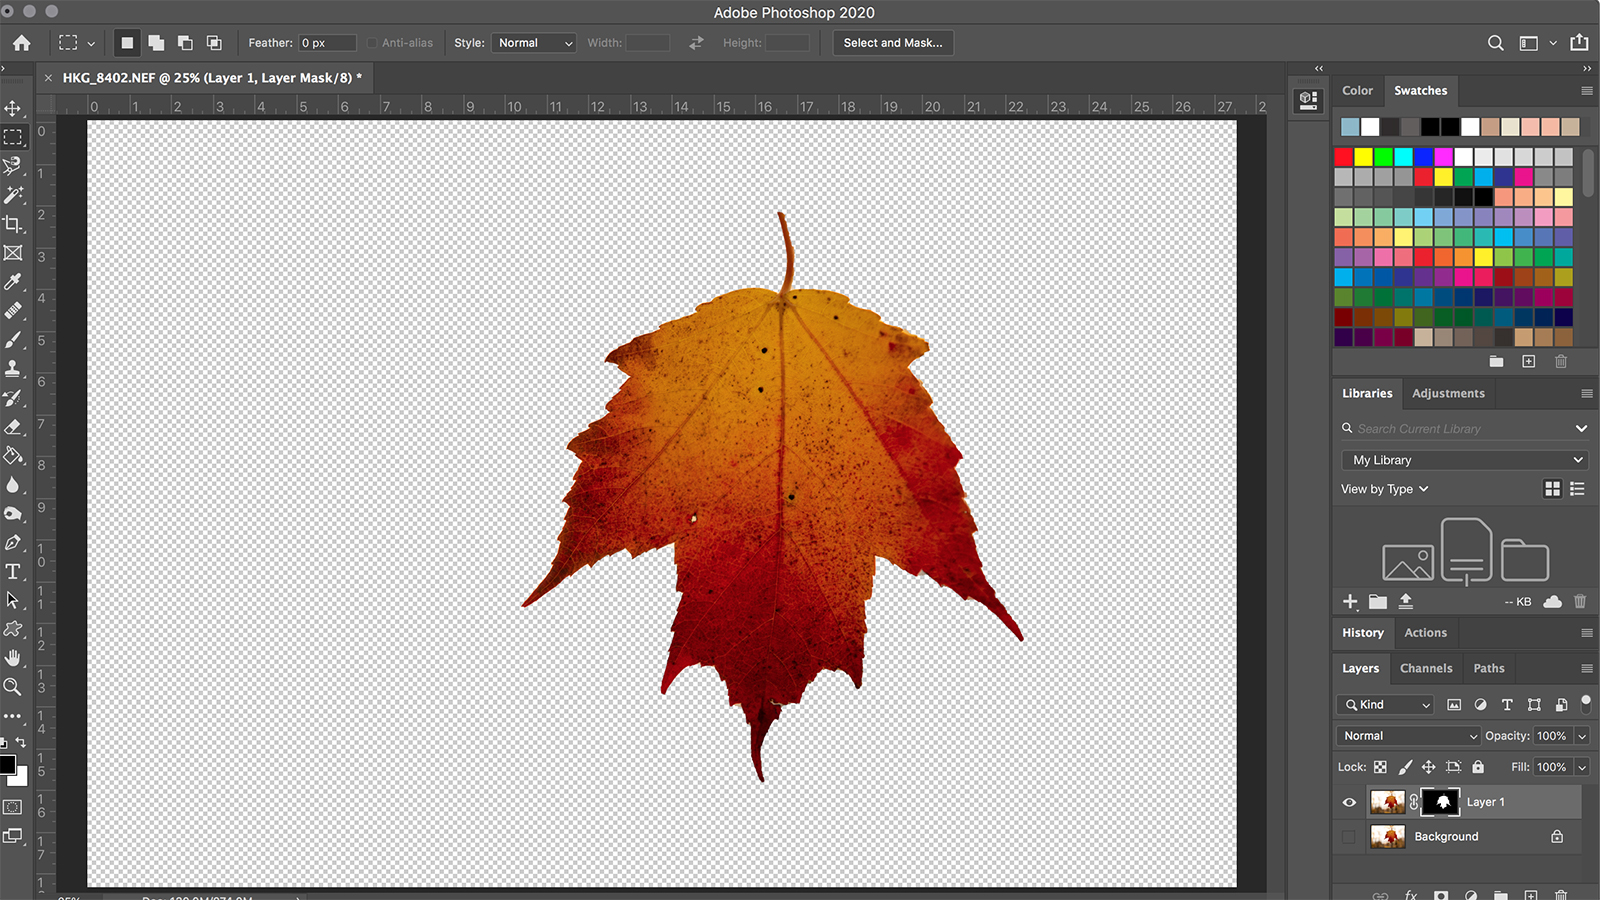 How to Copy/paste a transparent image from Photosh - Adobe